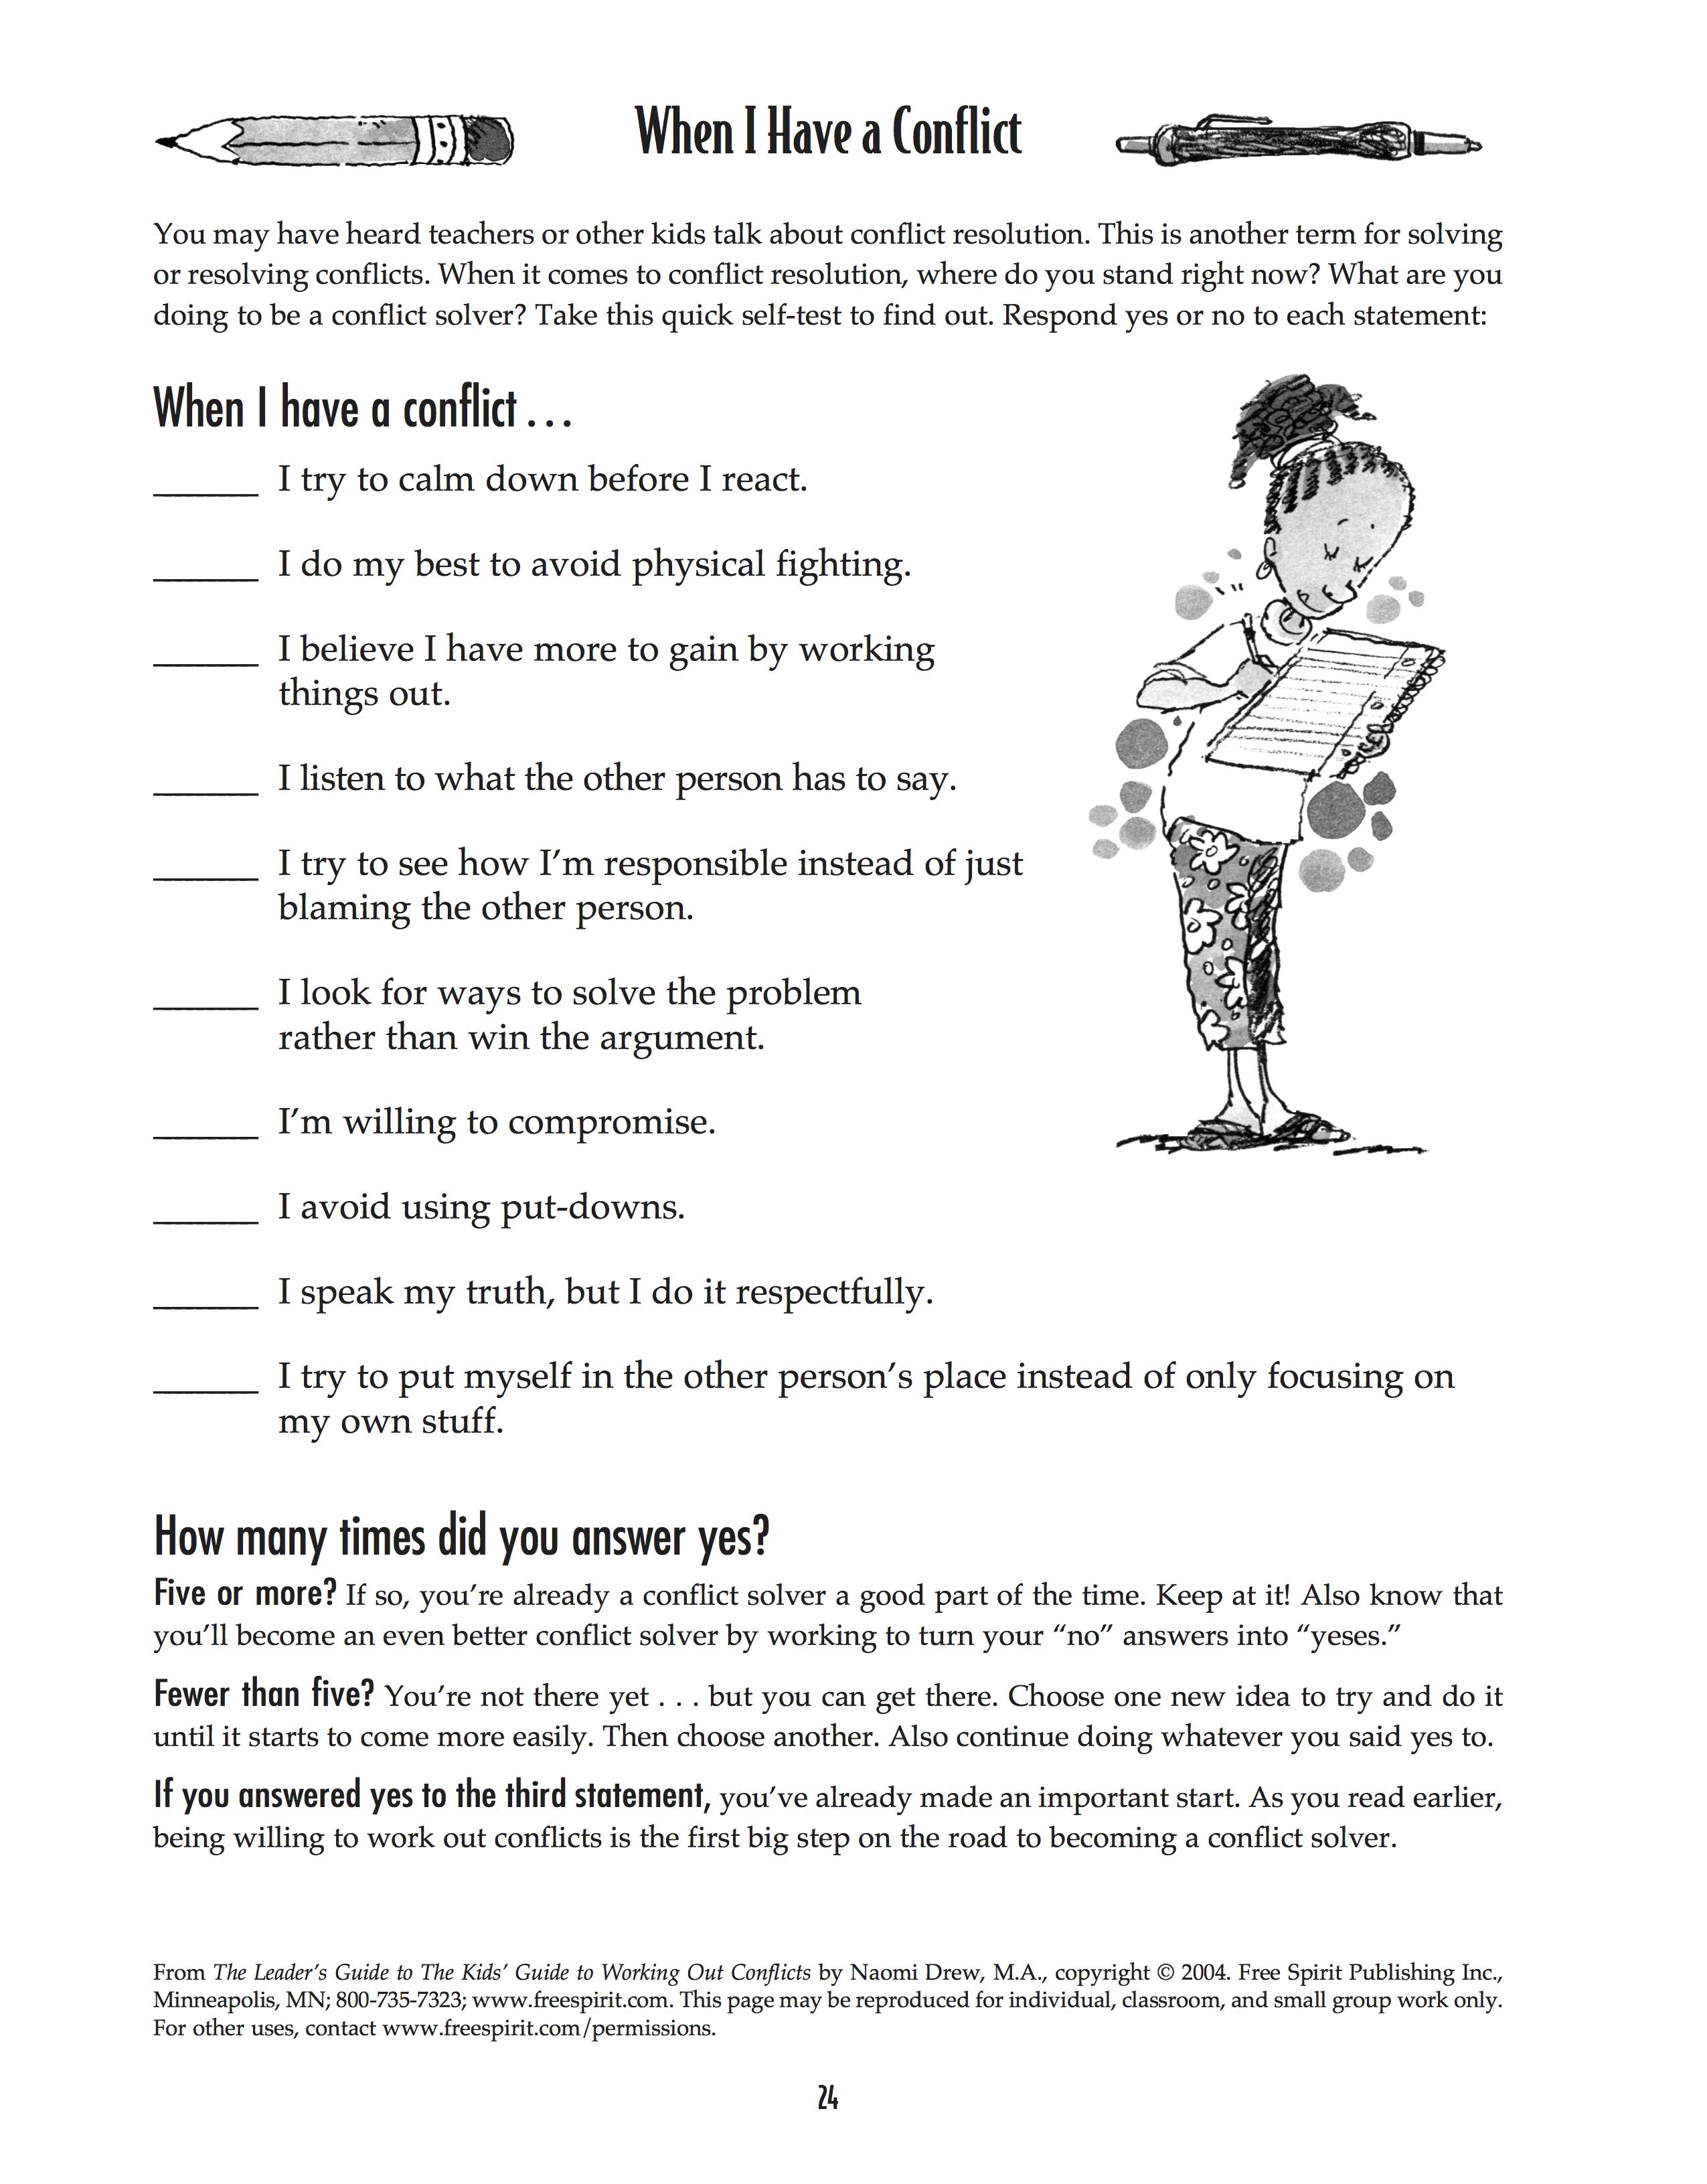 Free Printable Worksheet: When I Have A Conflict. A Quick Self-Test - Free Printable Activities For Adults